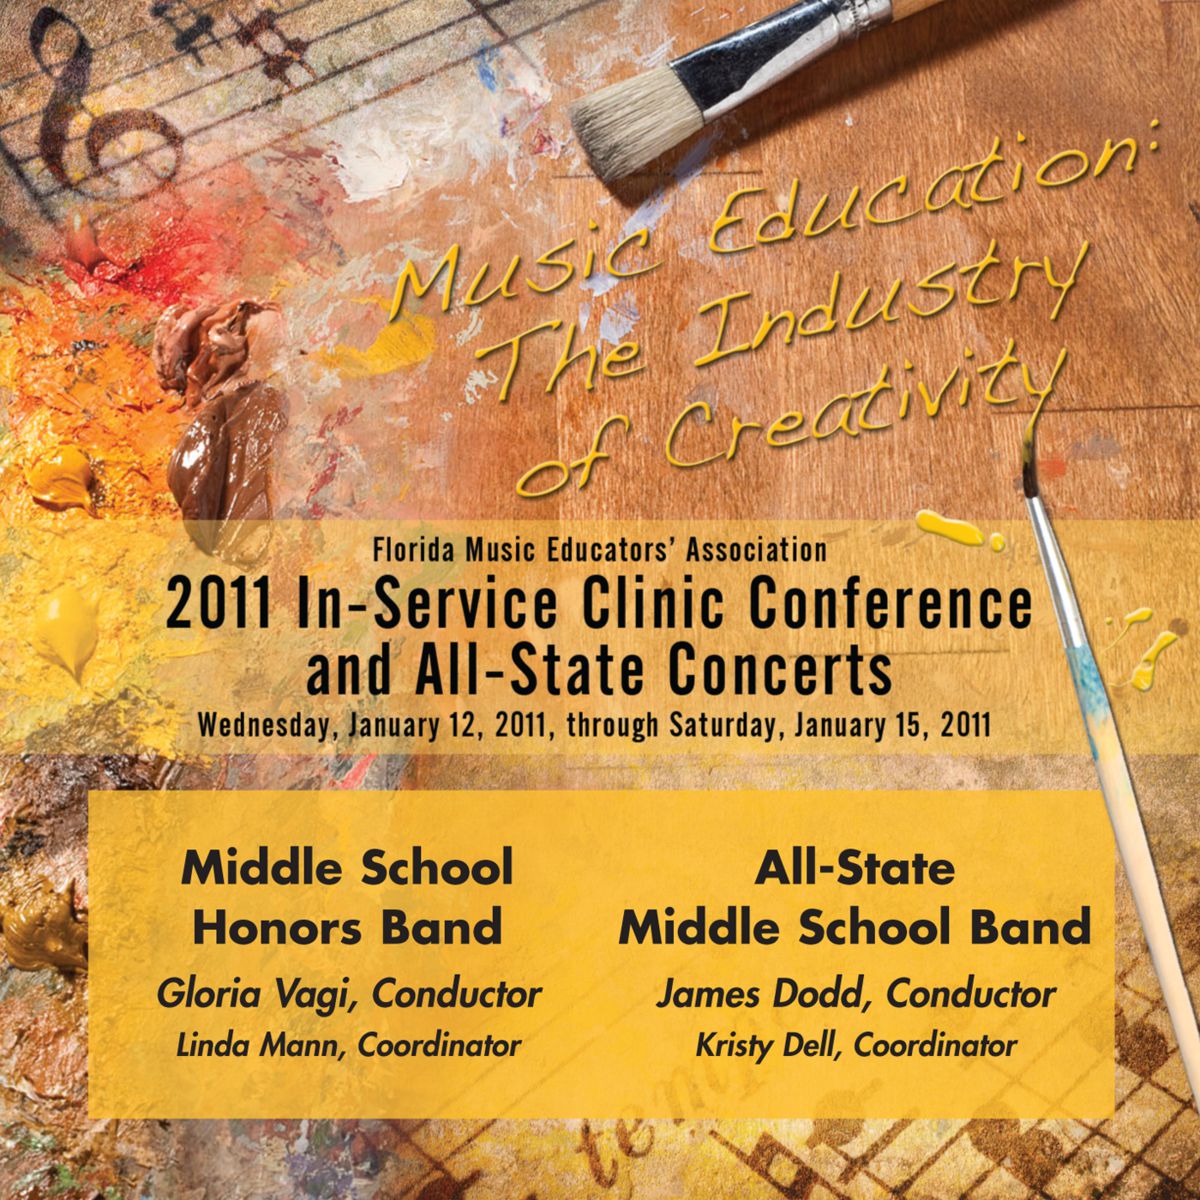 2011 Florida Music Educators Association: Middle School Honors Band and All-State Middle School Band - click here